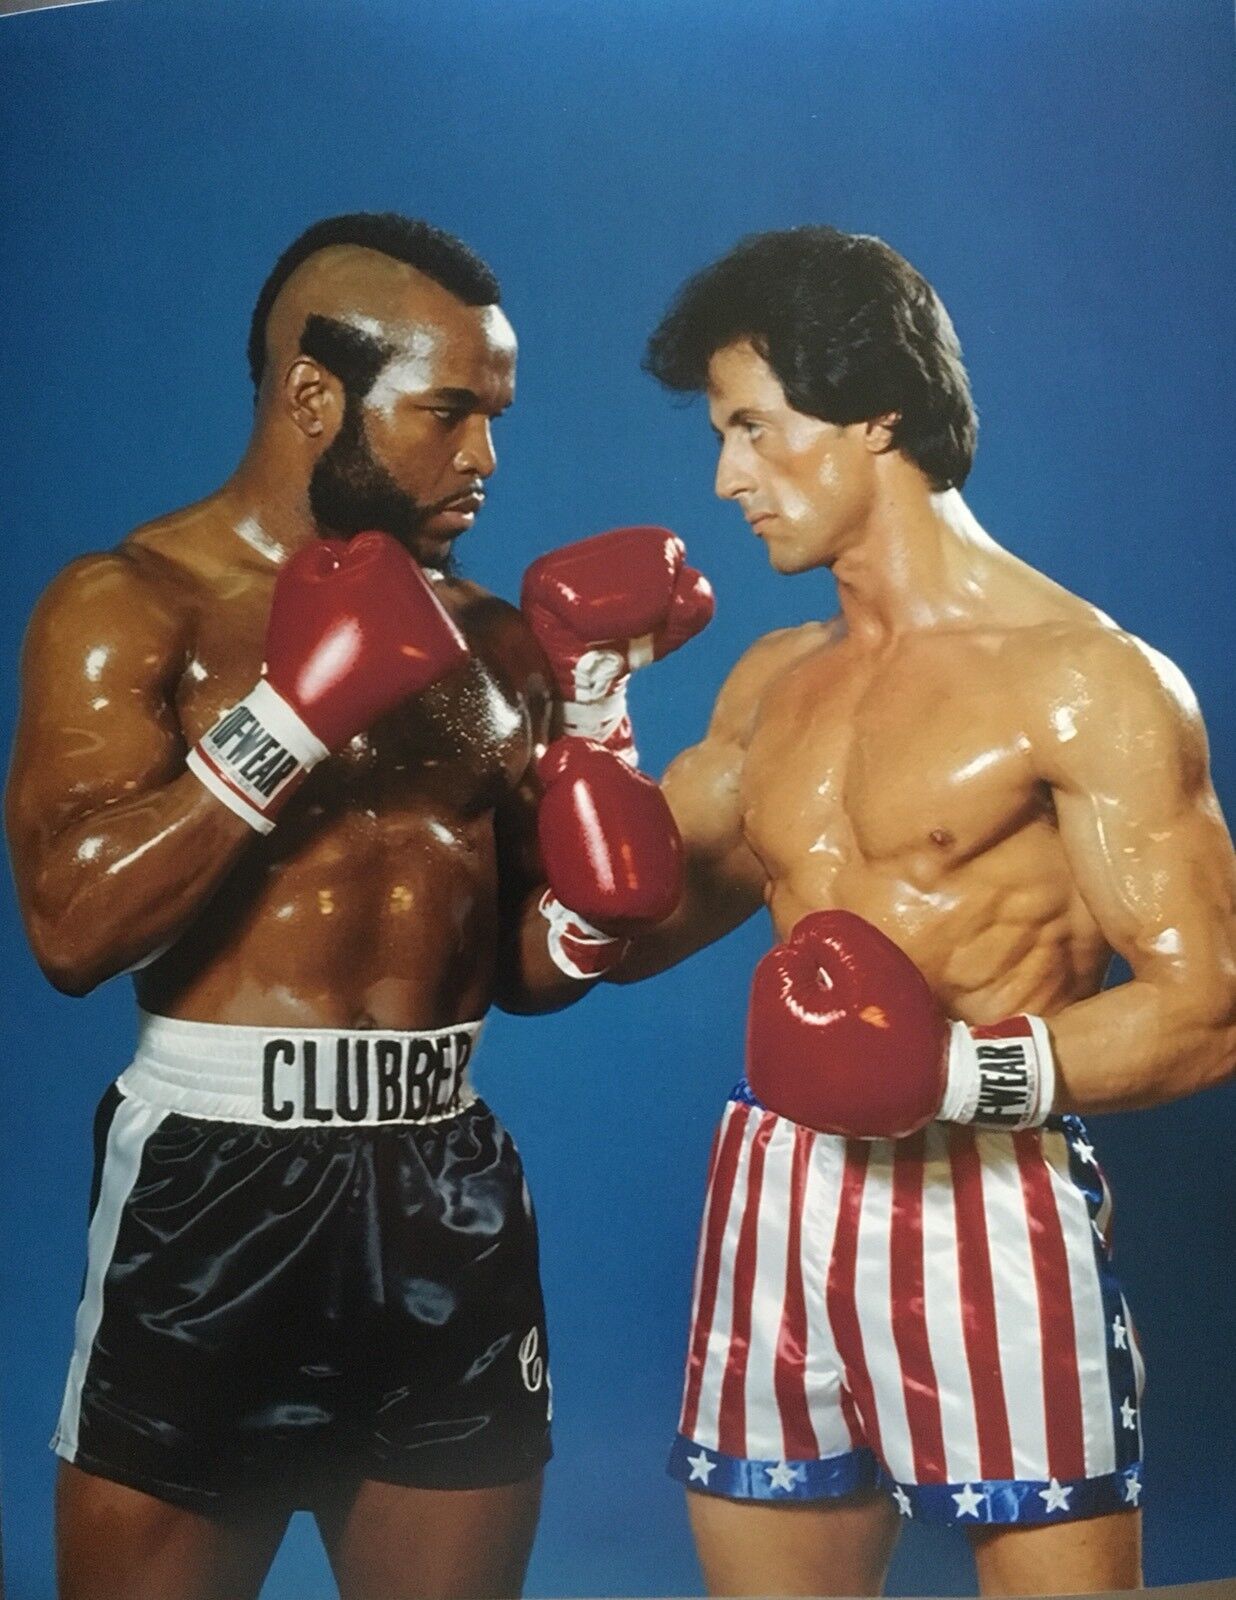 ROCKY 3 Photo Poster painting PRINT SYLVESTER STALLONE MR T PROMO Photo Poster paintingGRAPH